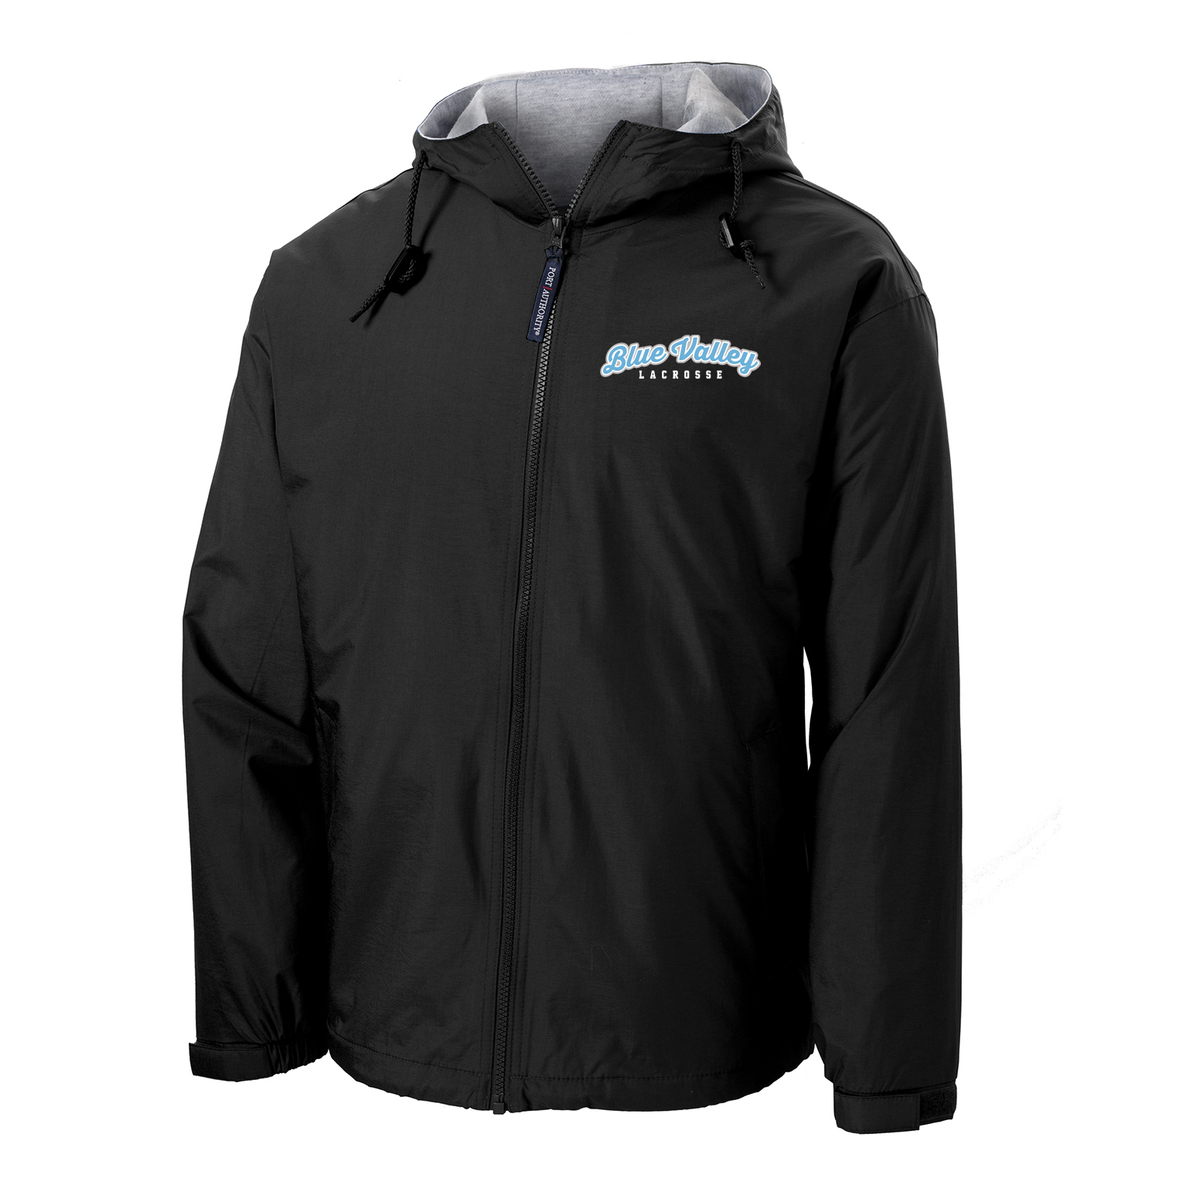 Blue Valley Spartans Hooded Jacket